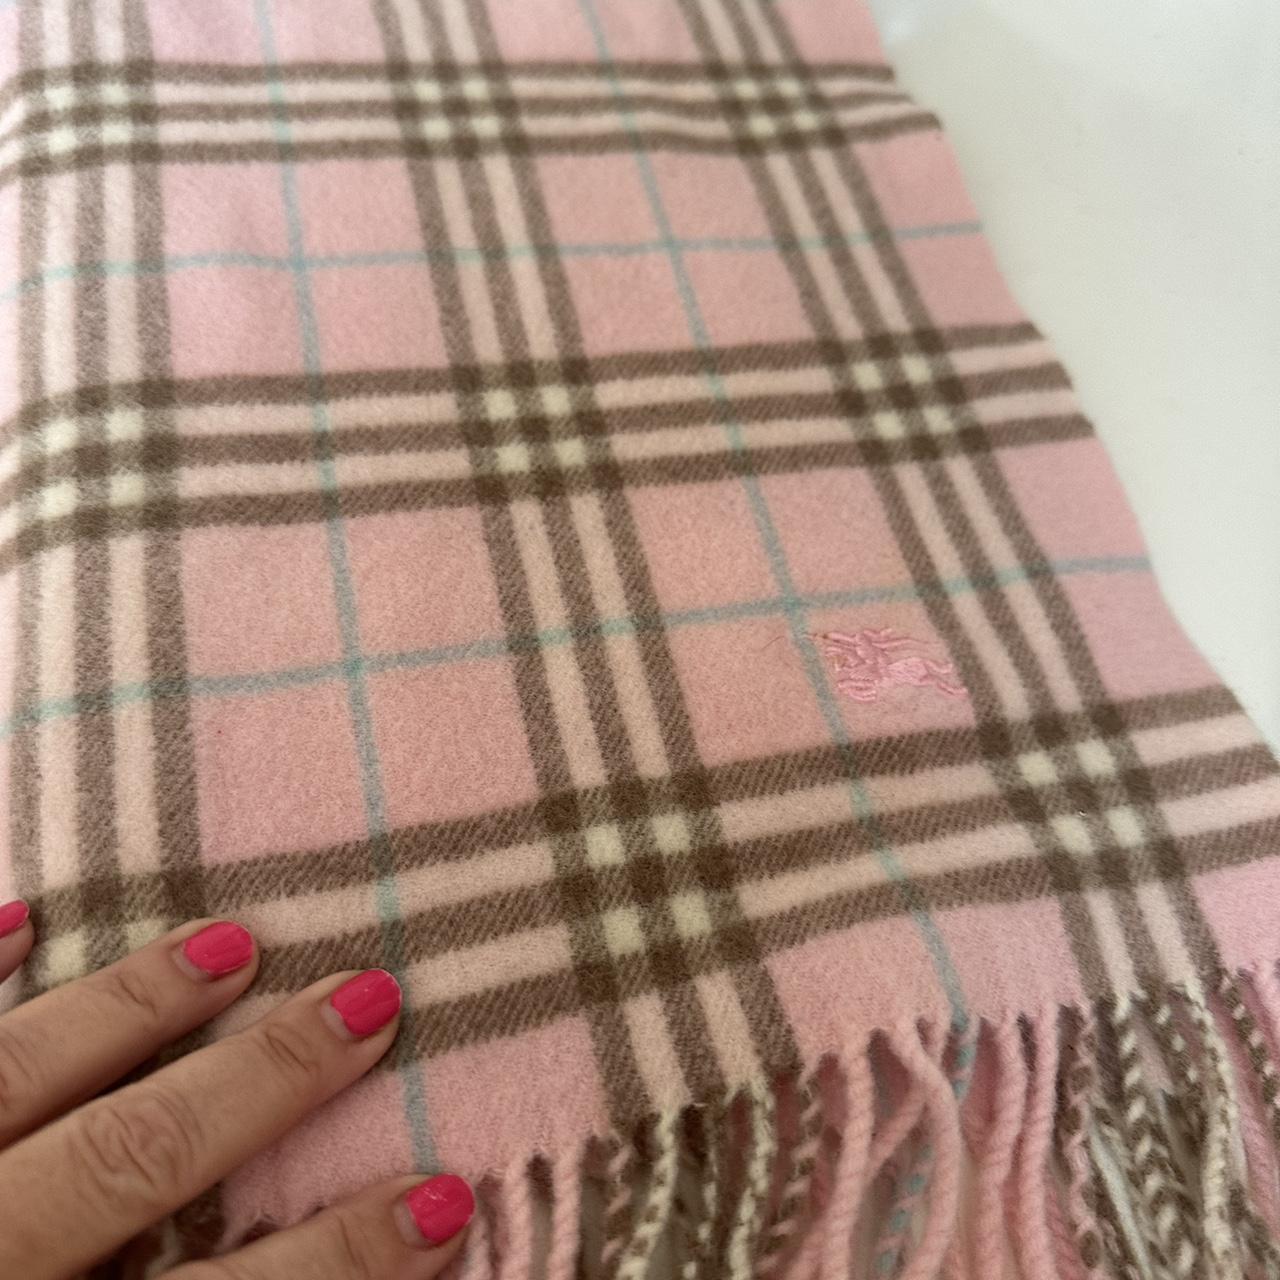 Genuine pale pink Burberry scarf - in mint condition - Depop